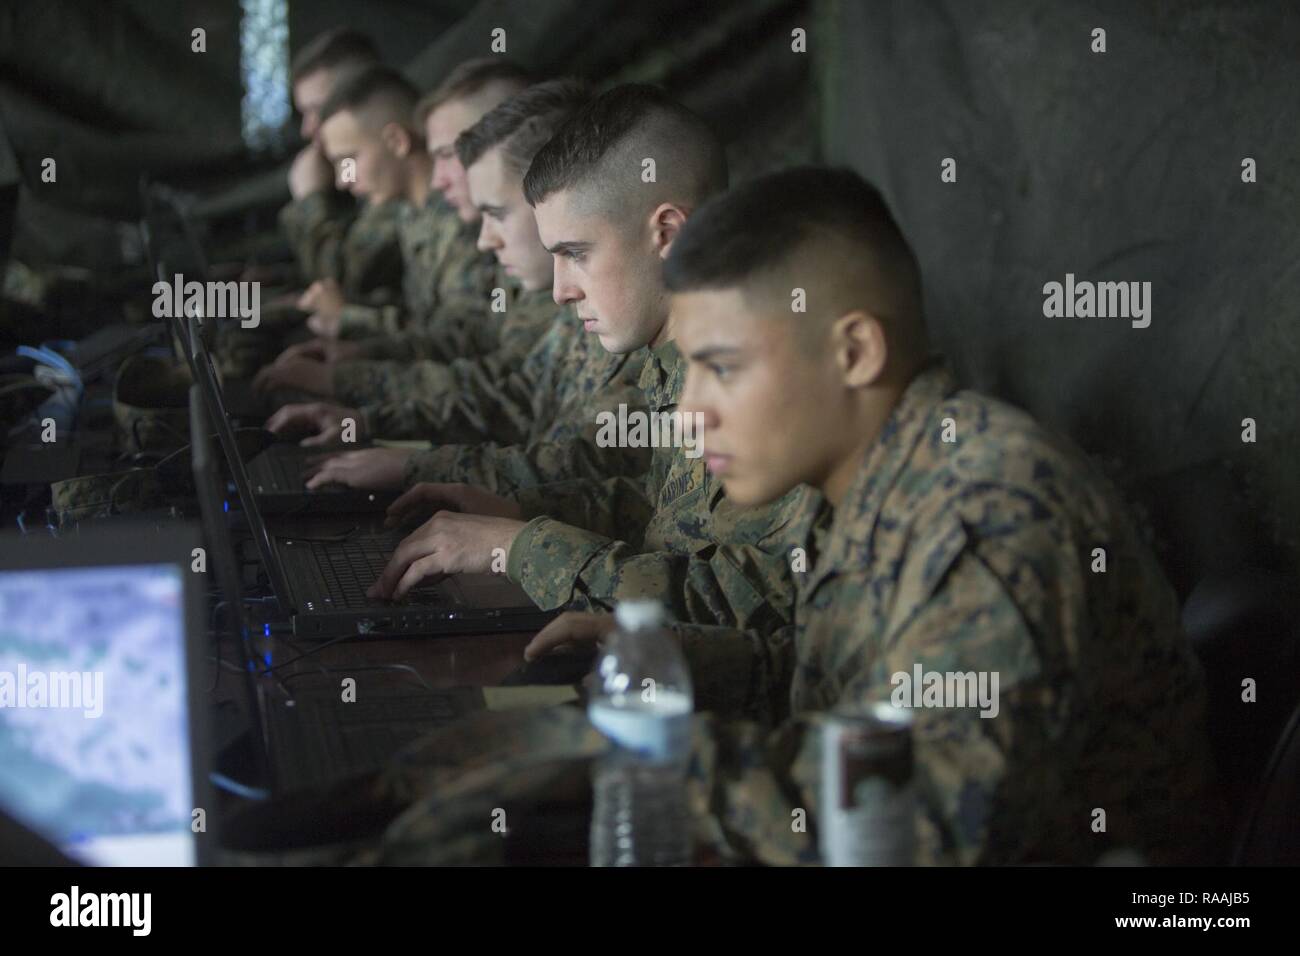 U.S. Marines with 2nd Battalion, 6th Marine Regiment, 2nd Marine Division (2d MARDIV), compete in the Spartan Tactical Games utilizing Virtual Battlespace 3 (VBS 3) on Camp Lejeune, N.C., Jan. 10, 2017. VBS 3 and the Spartan Tactical Games allow the Marines to test their tactical and cognitive thinking while competing against each other on a squad level. Stock Photo